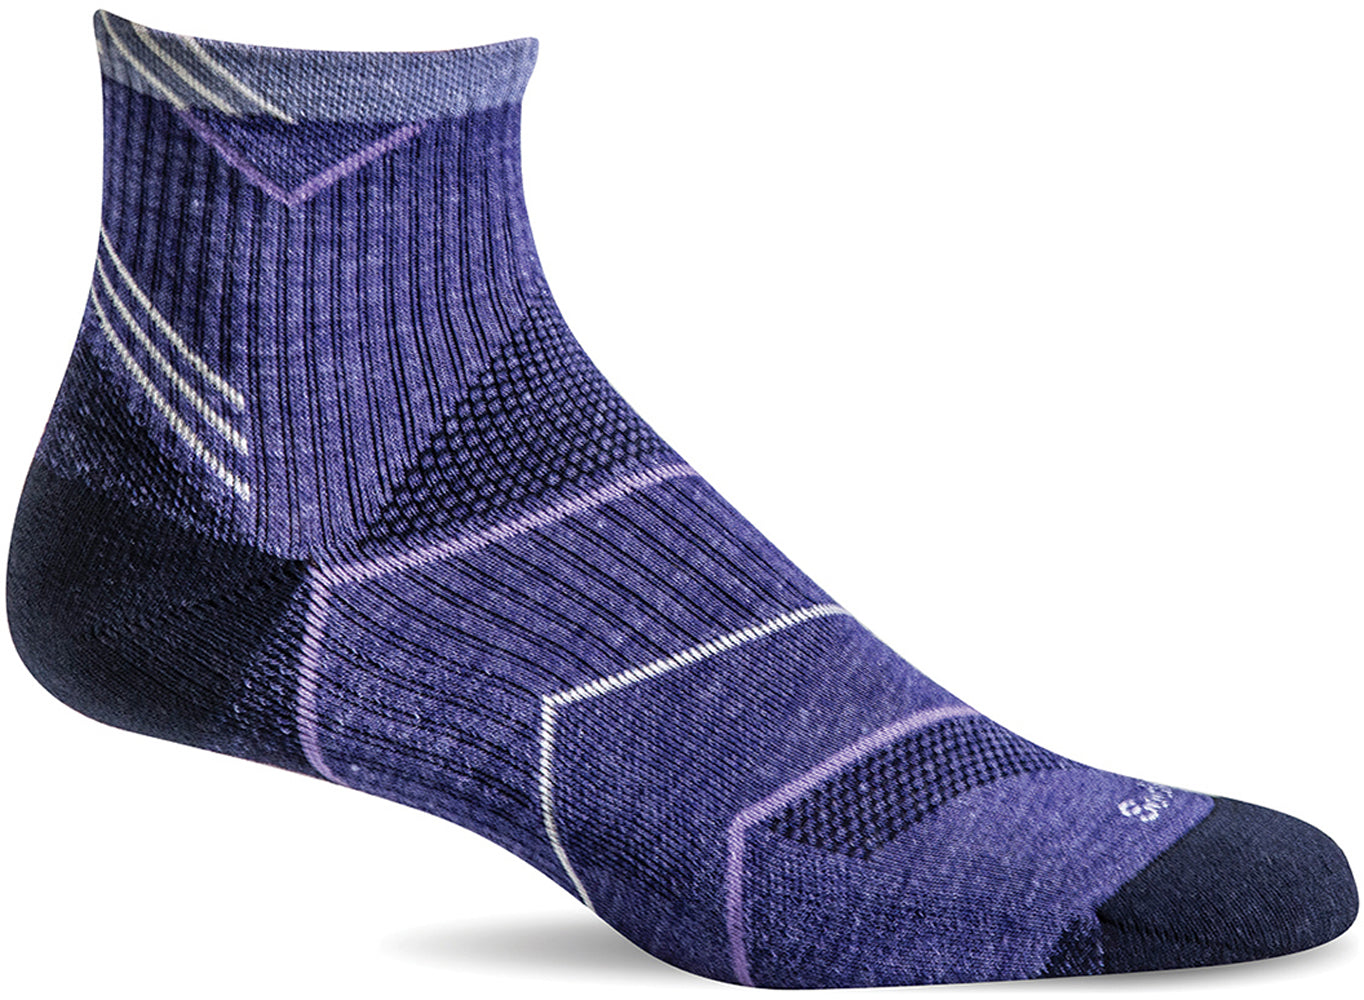 Sockwell Women's Incline Quarter Sock in Hyacinth color from the side